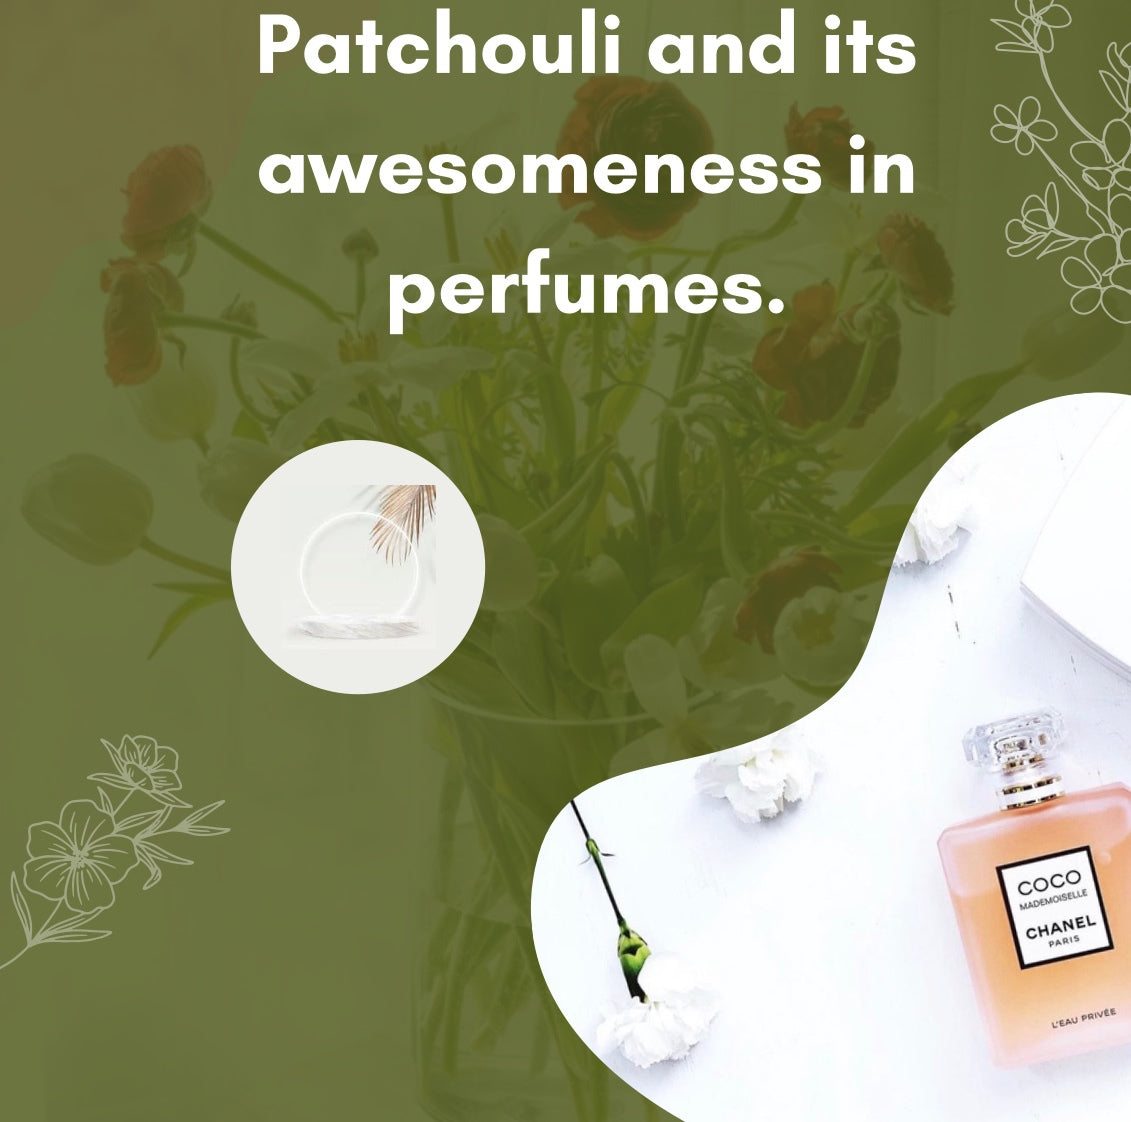 EXPERIENCE THE AWESOMENESS OF PATCHOULI IN PERFUMES